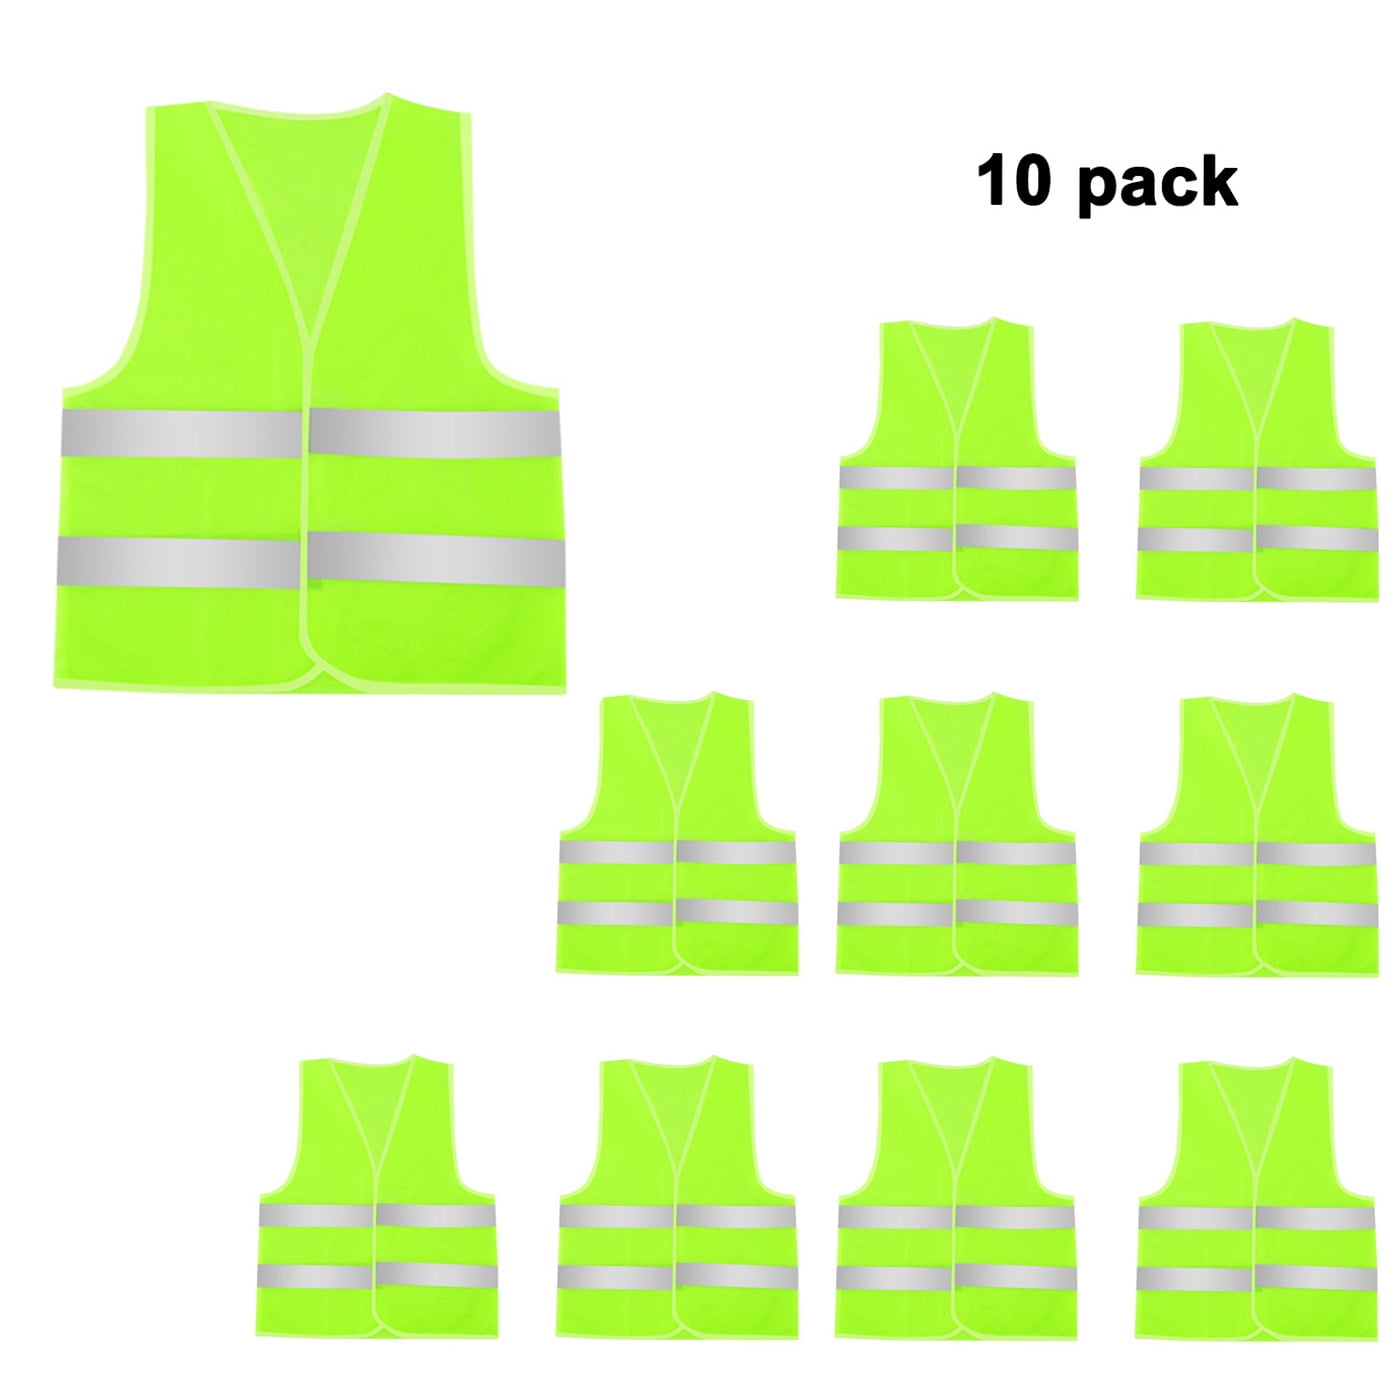 Genuine Dickies Hi-Vis Synthetic Vest, 3M™ Scotchlite™ Reflective Taping,  ANSI Class 2 